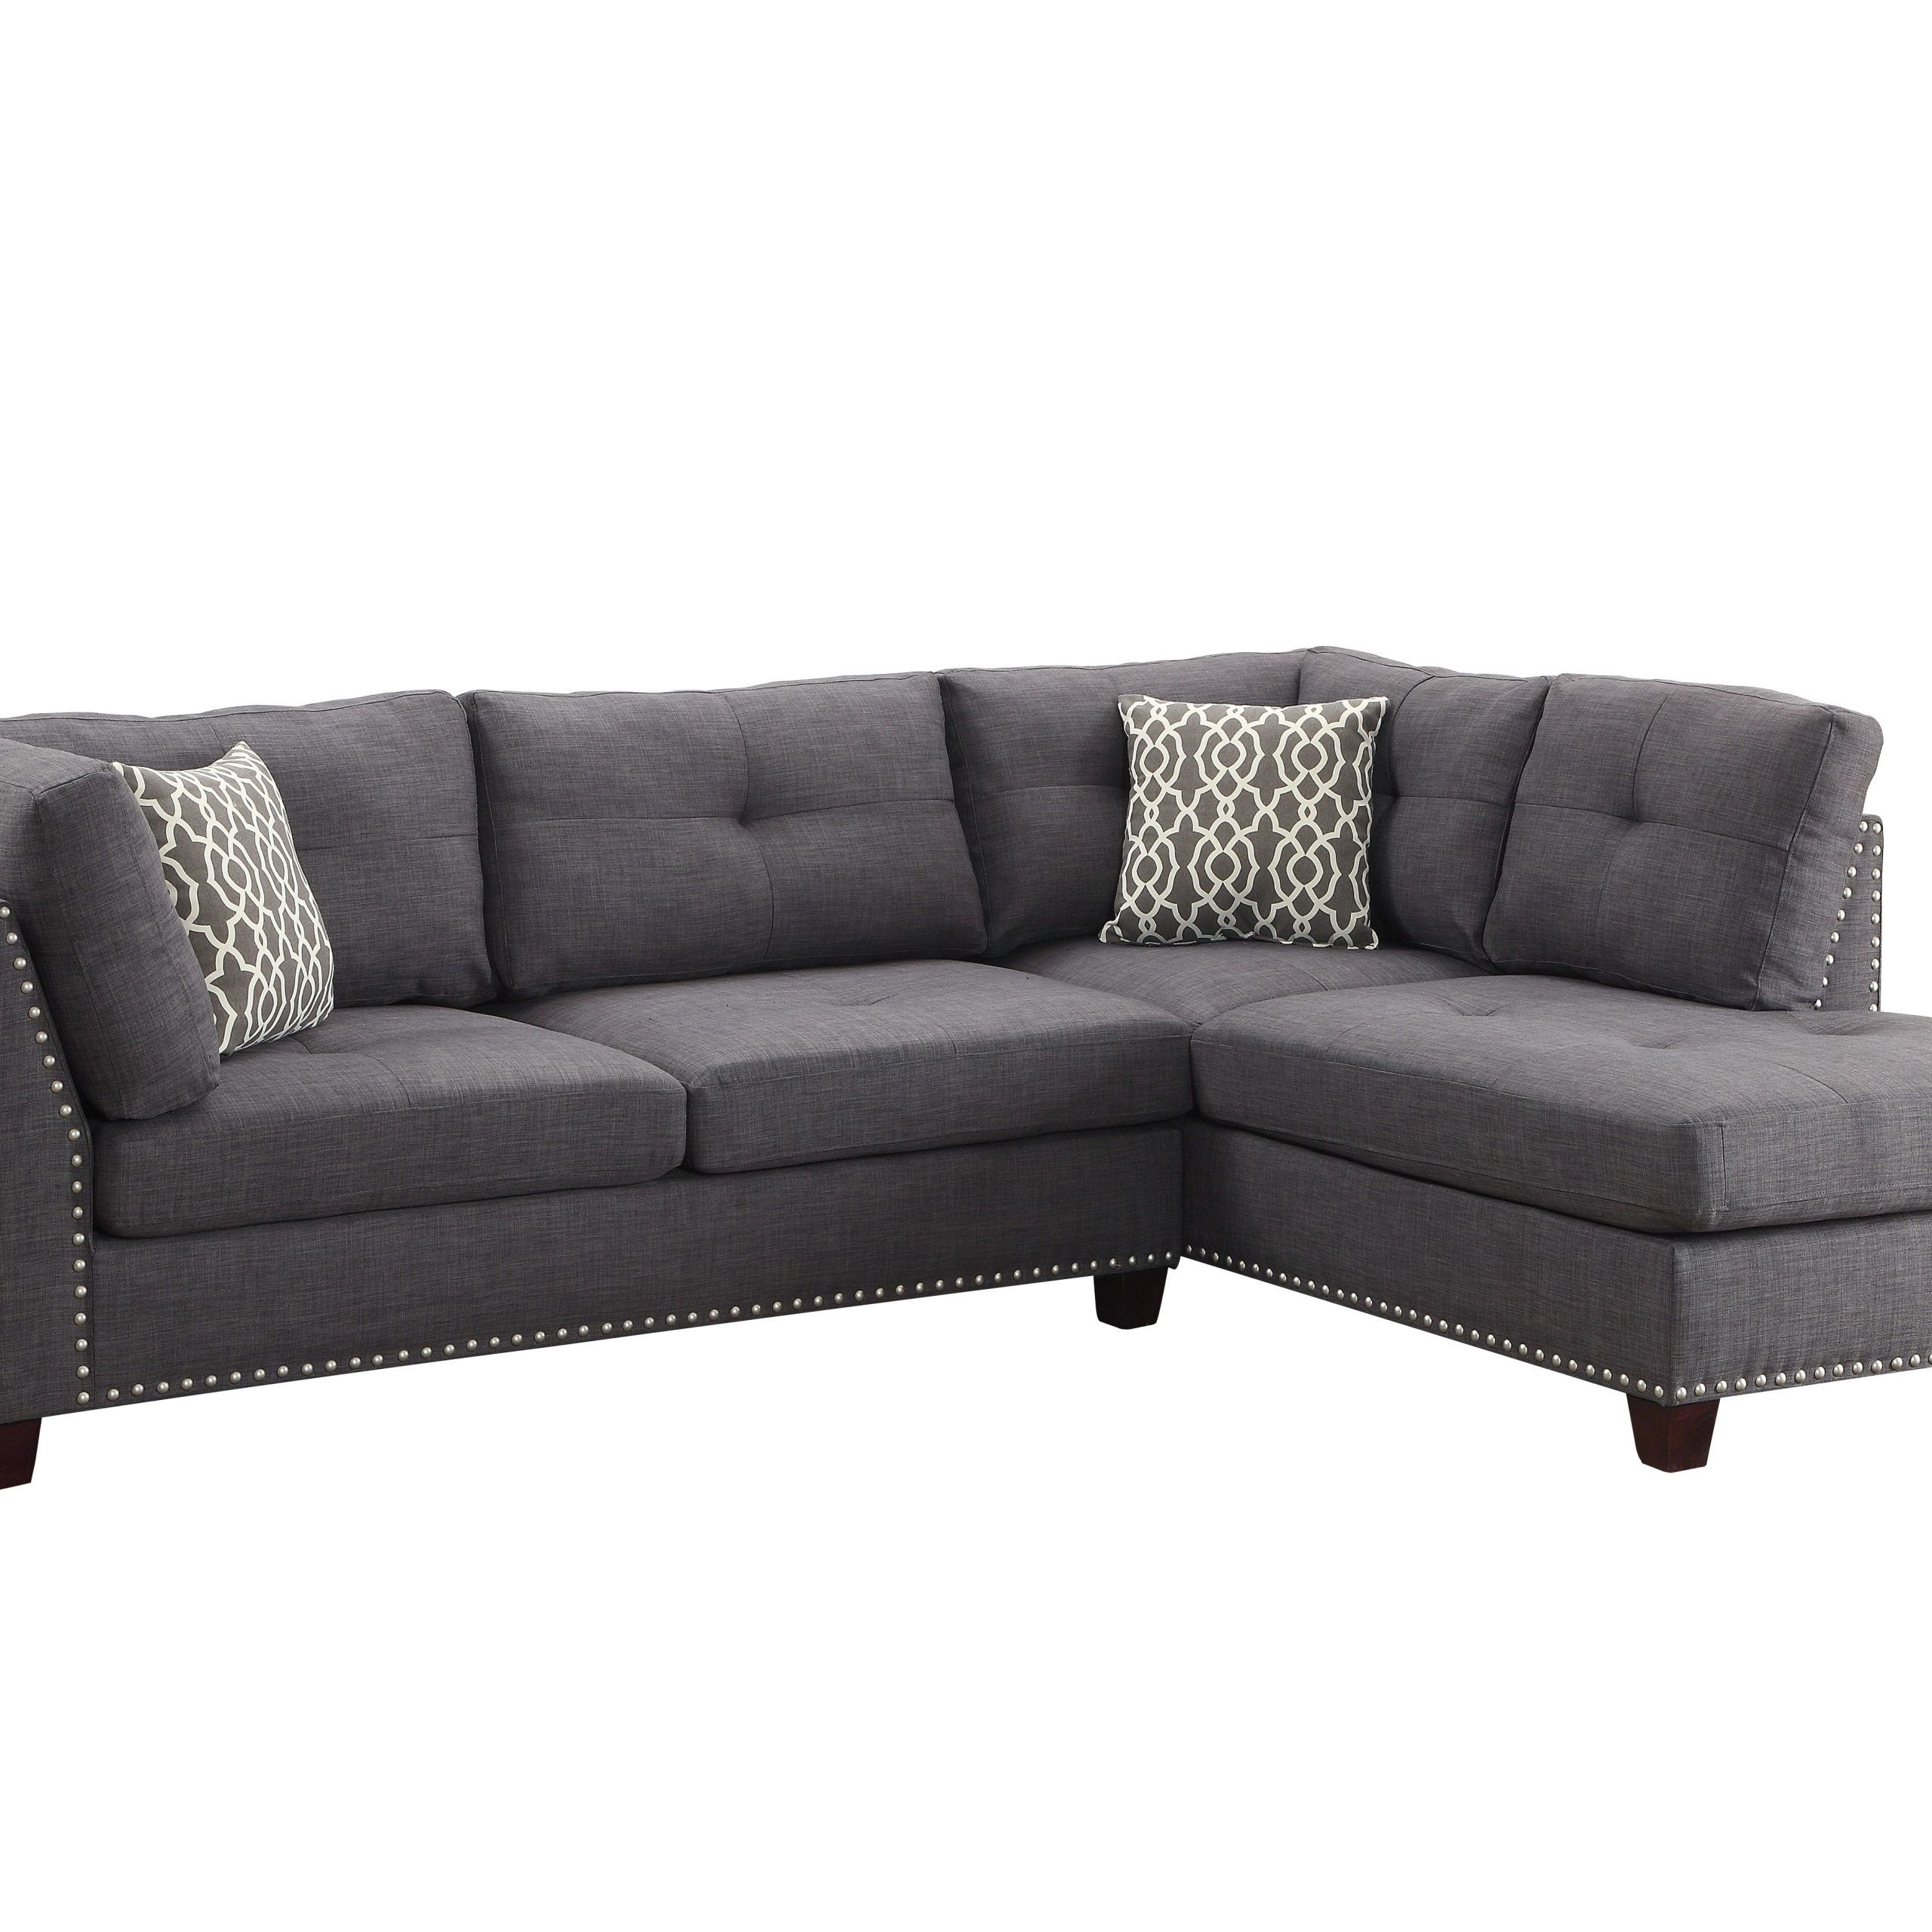 Laurissa Sectional Sofa With 2 Pillows & Ottoman In Light Charcoal Within Light Charcoal Linen Sofas (Gallery 2 of 20)